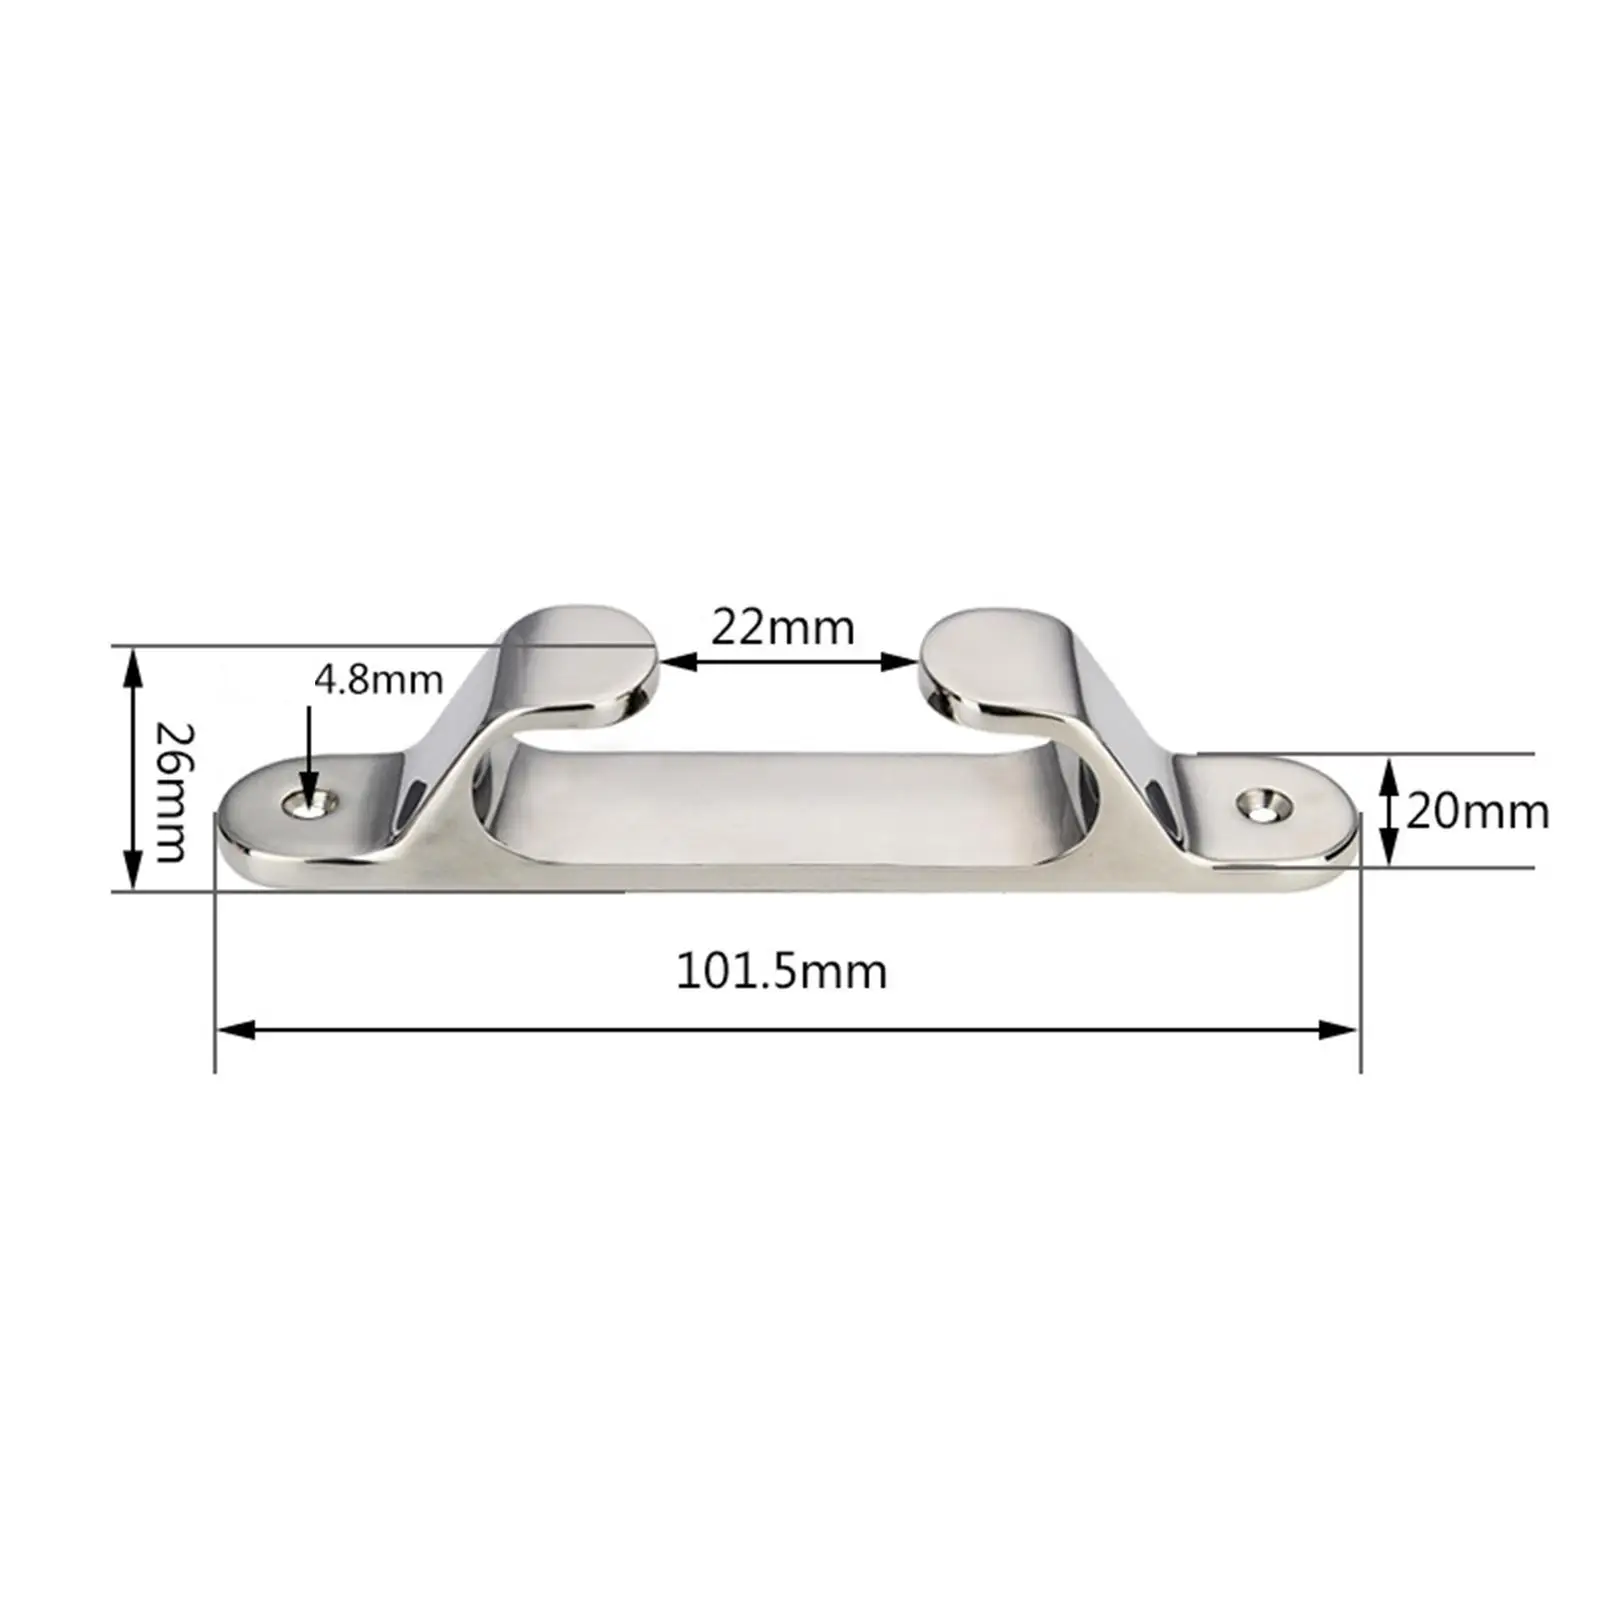 

4in Straight Fairlead Bow Chock Hardware Fair Leads Line Boat 102mm Rope Guide Line Cleat for Marine Yacht Polished Silver